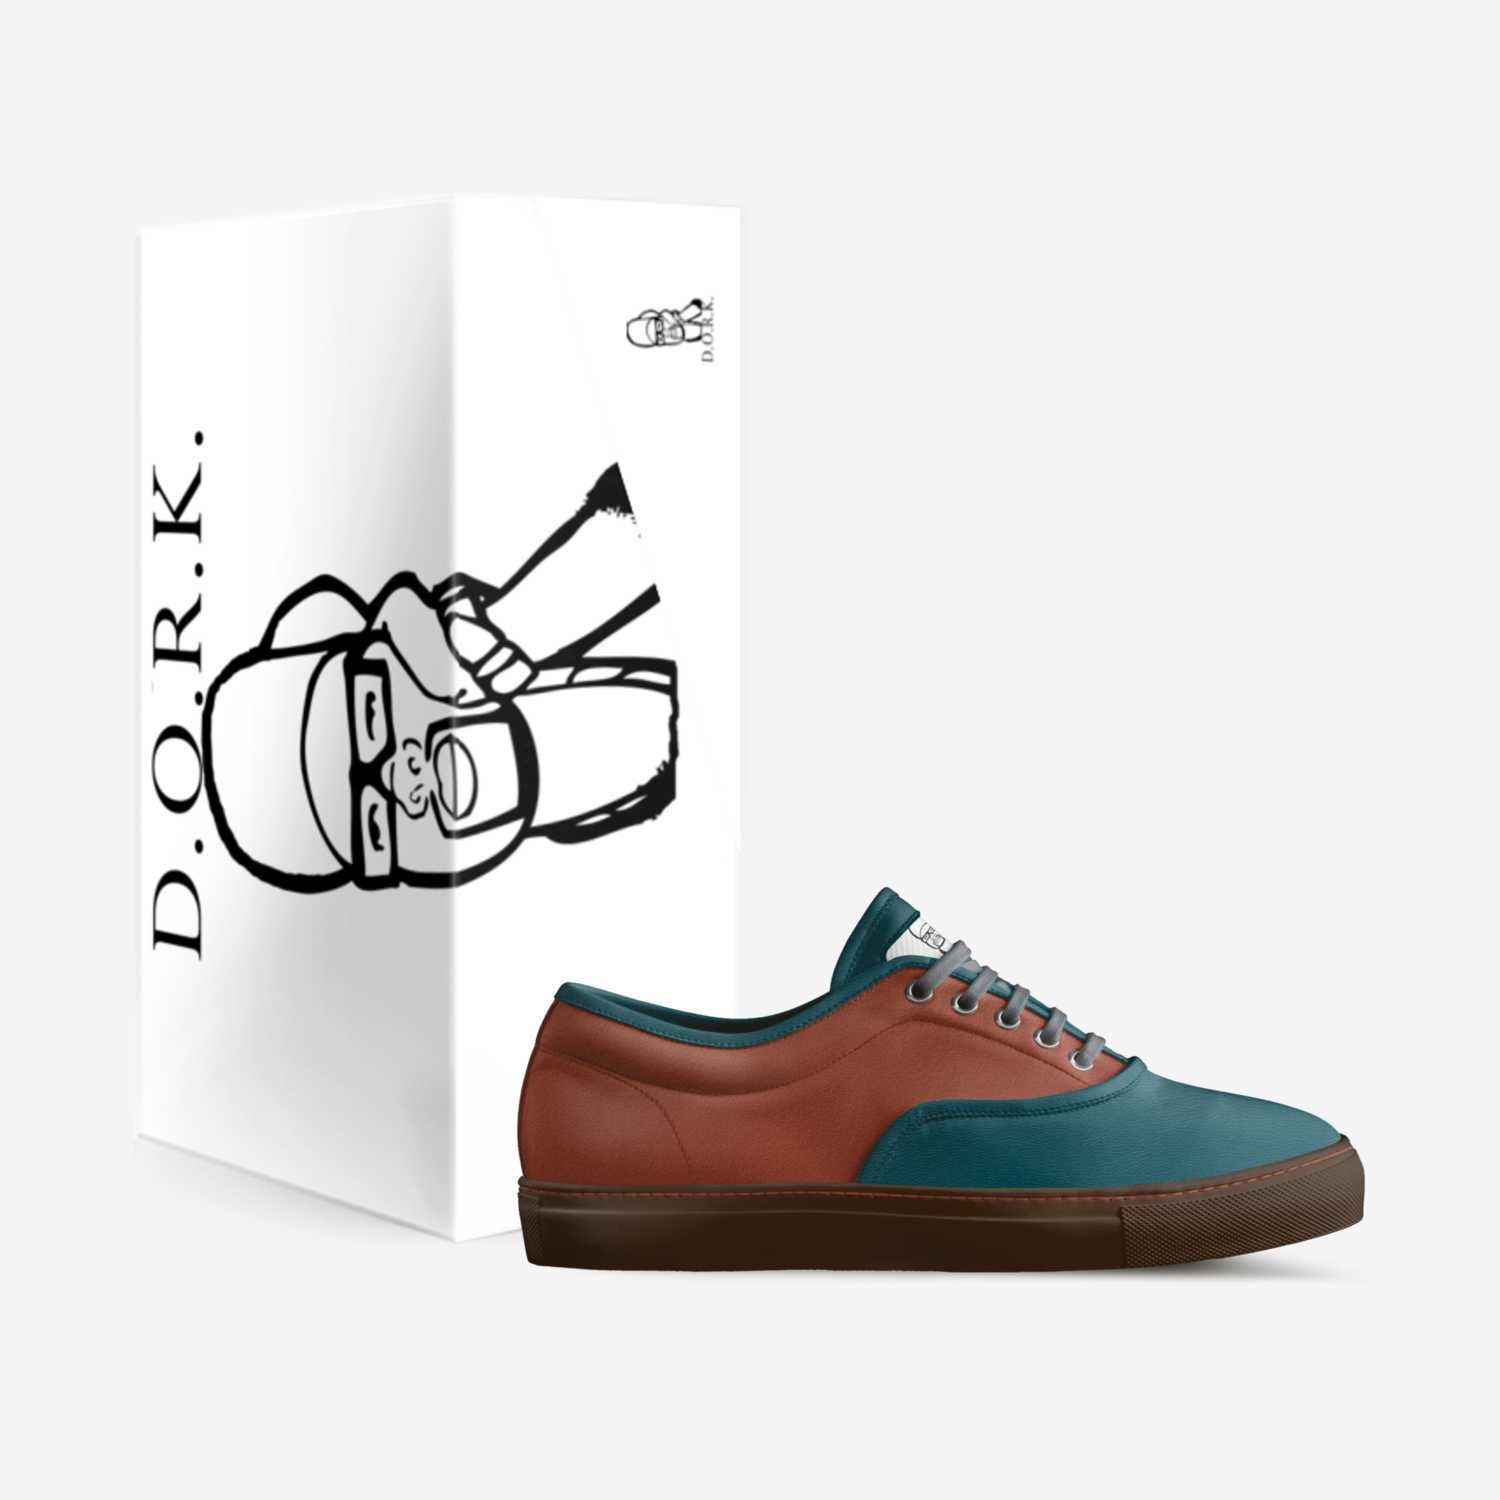 D.O.R.K. custom made in Italy shoes by Brandon Slaughter | Box view